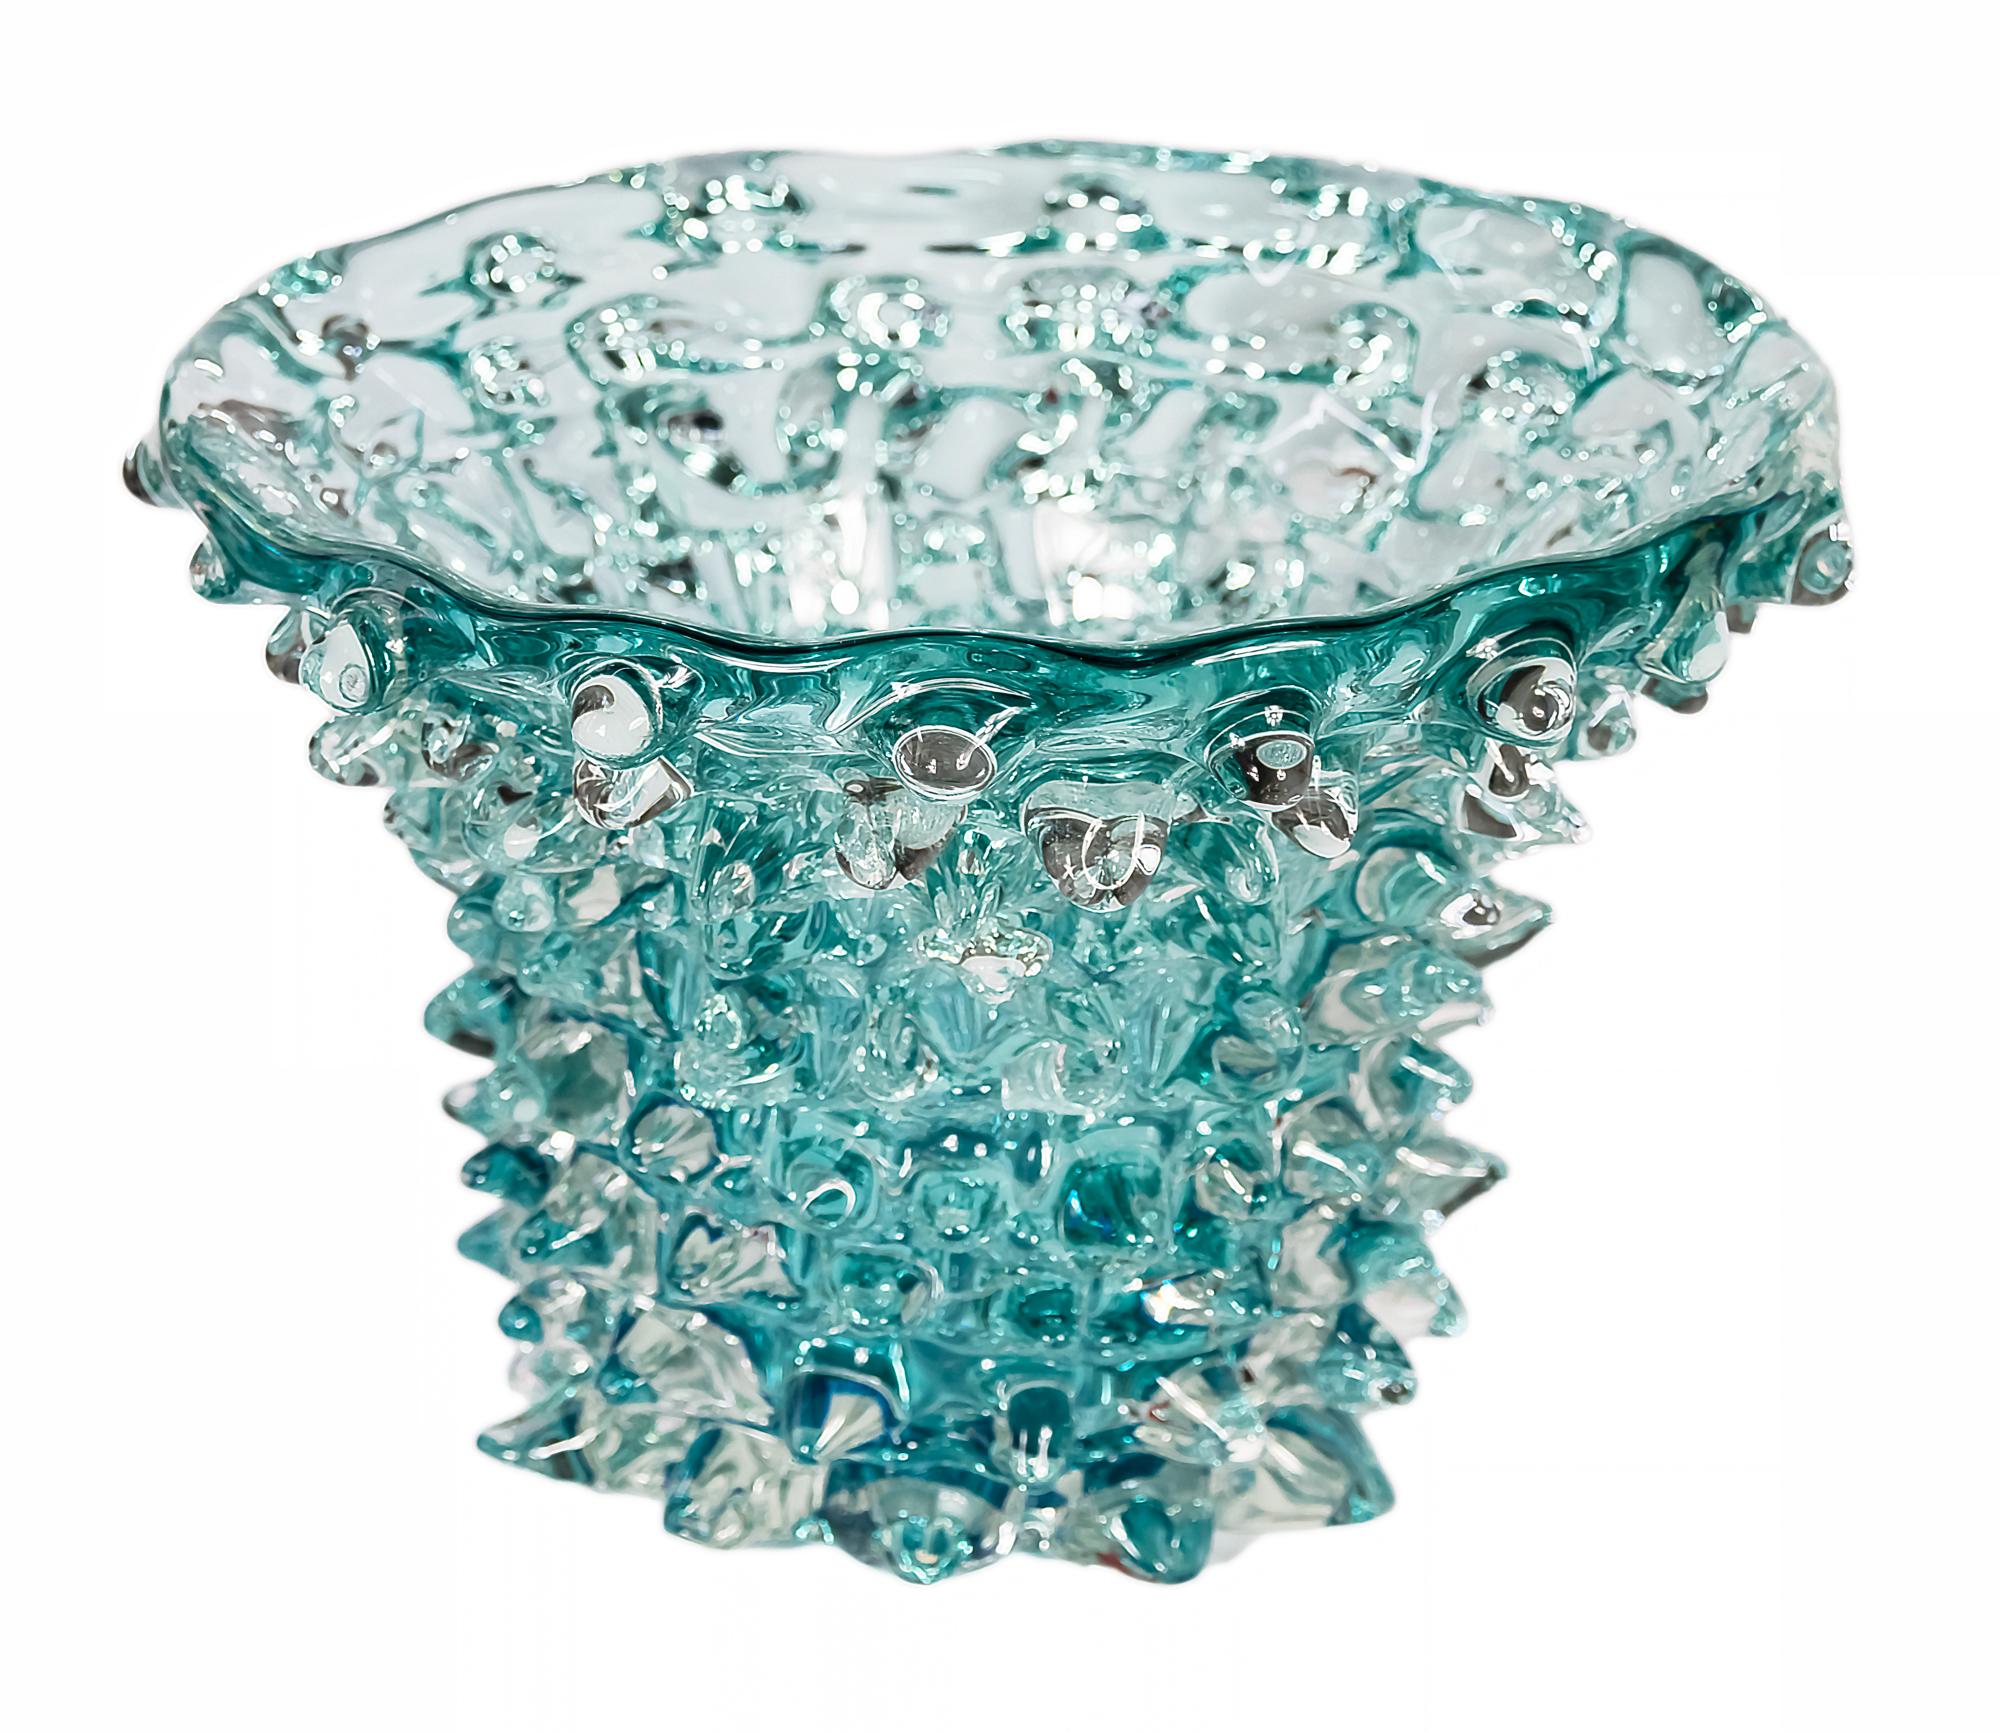 Italian handmade Murano glass vase, signed E. Camozzo.
The glass is emerald green/aquamarine colour. 
This vase is solid and very heavy.